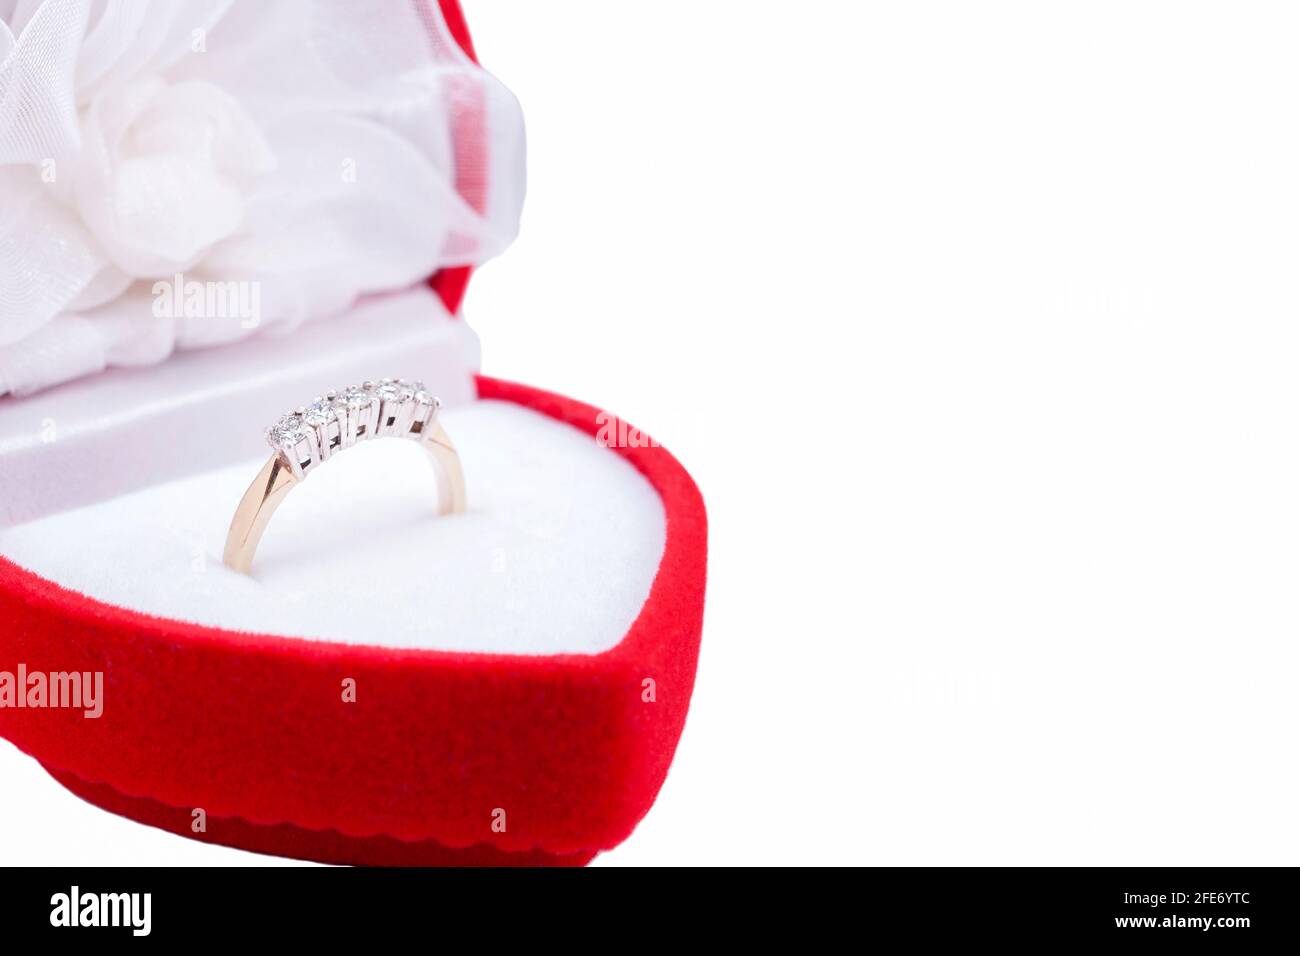 Beautiful, Elegant, Diamond Ring In A Red Box. Ring For A Gift Stock Photo  - Alamy